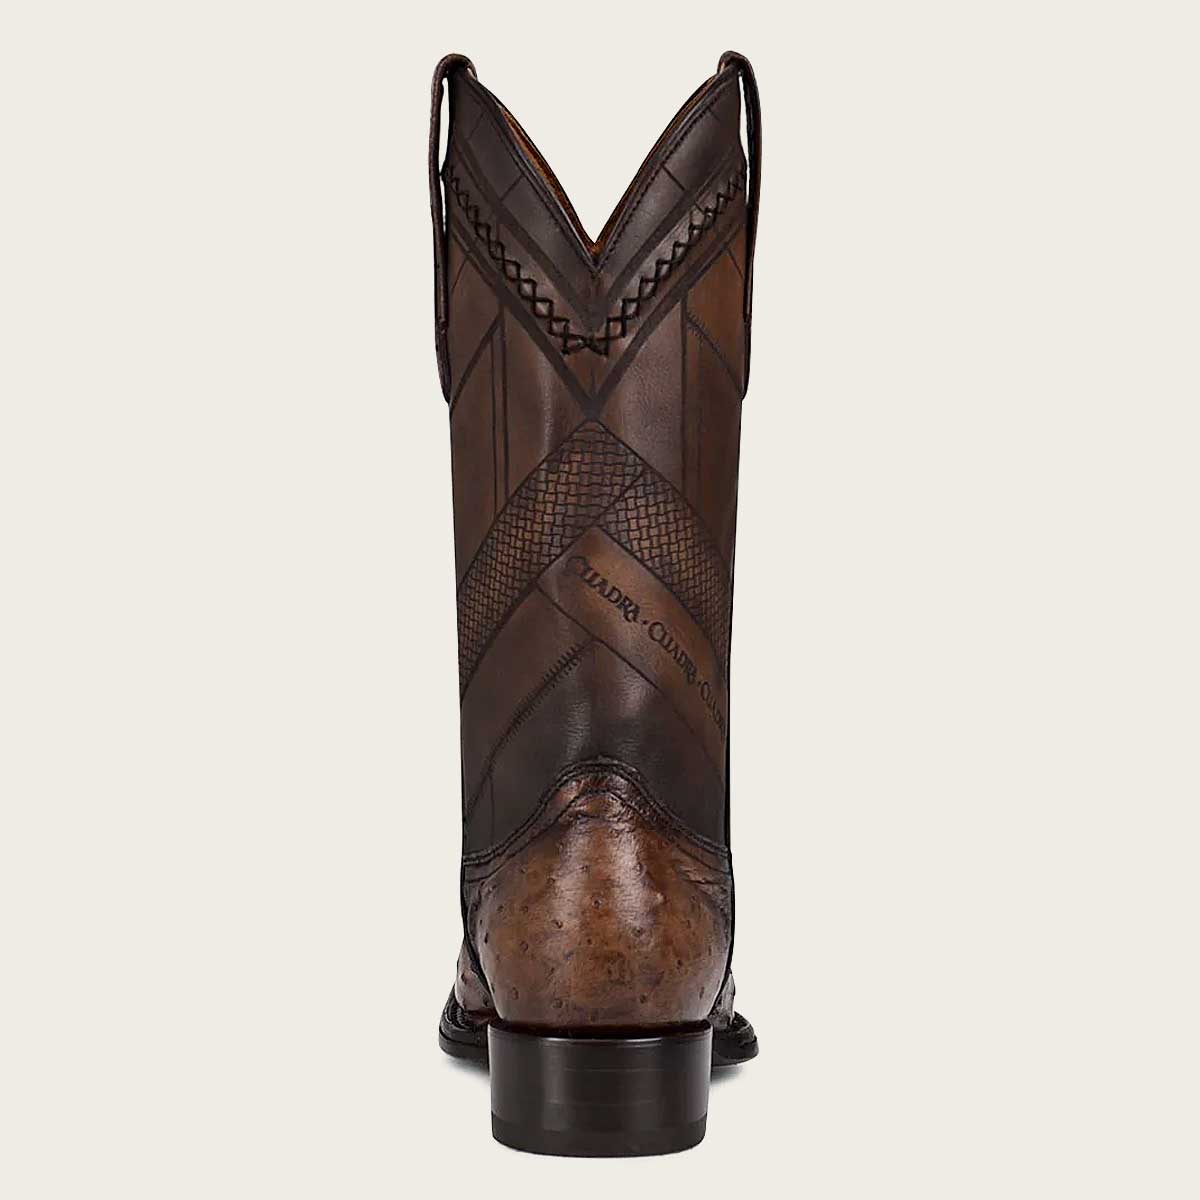 Stylish men's dark brown leather boots with intricate laser-engraved details and expert craftsmanship